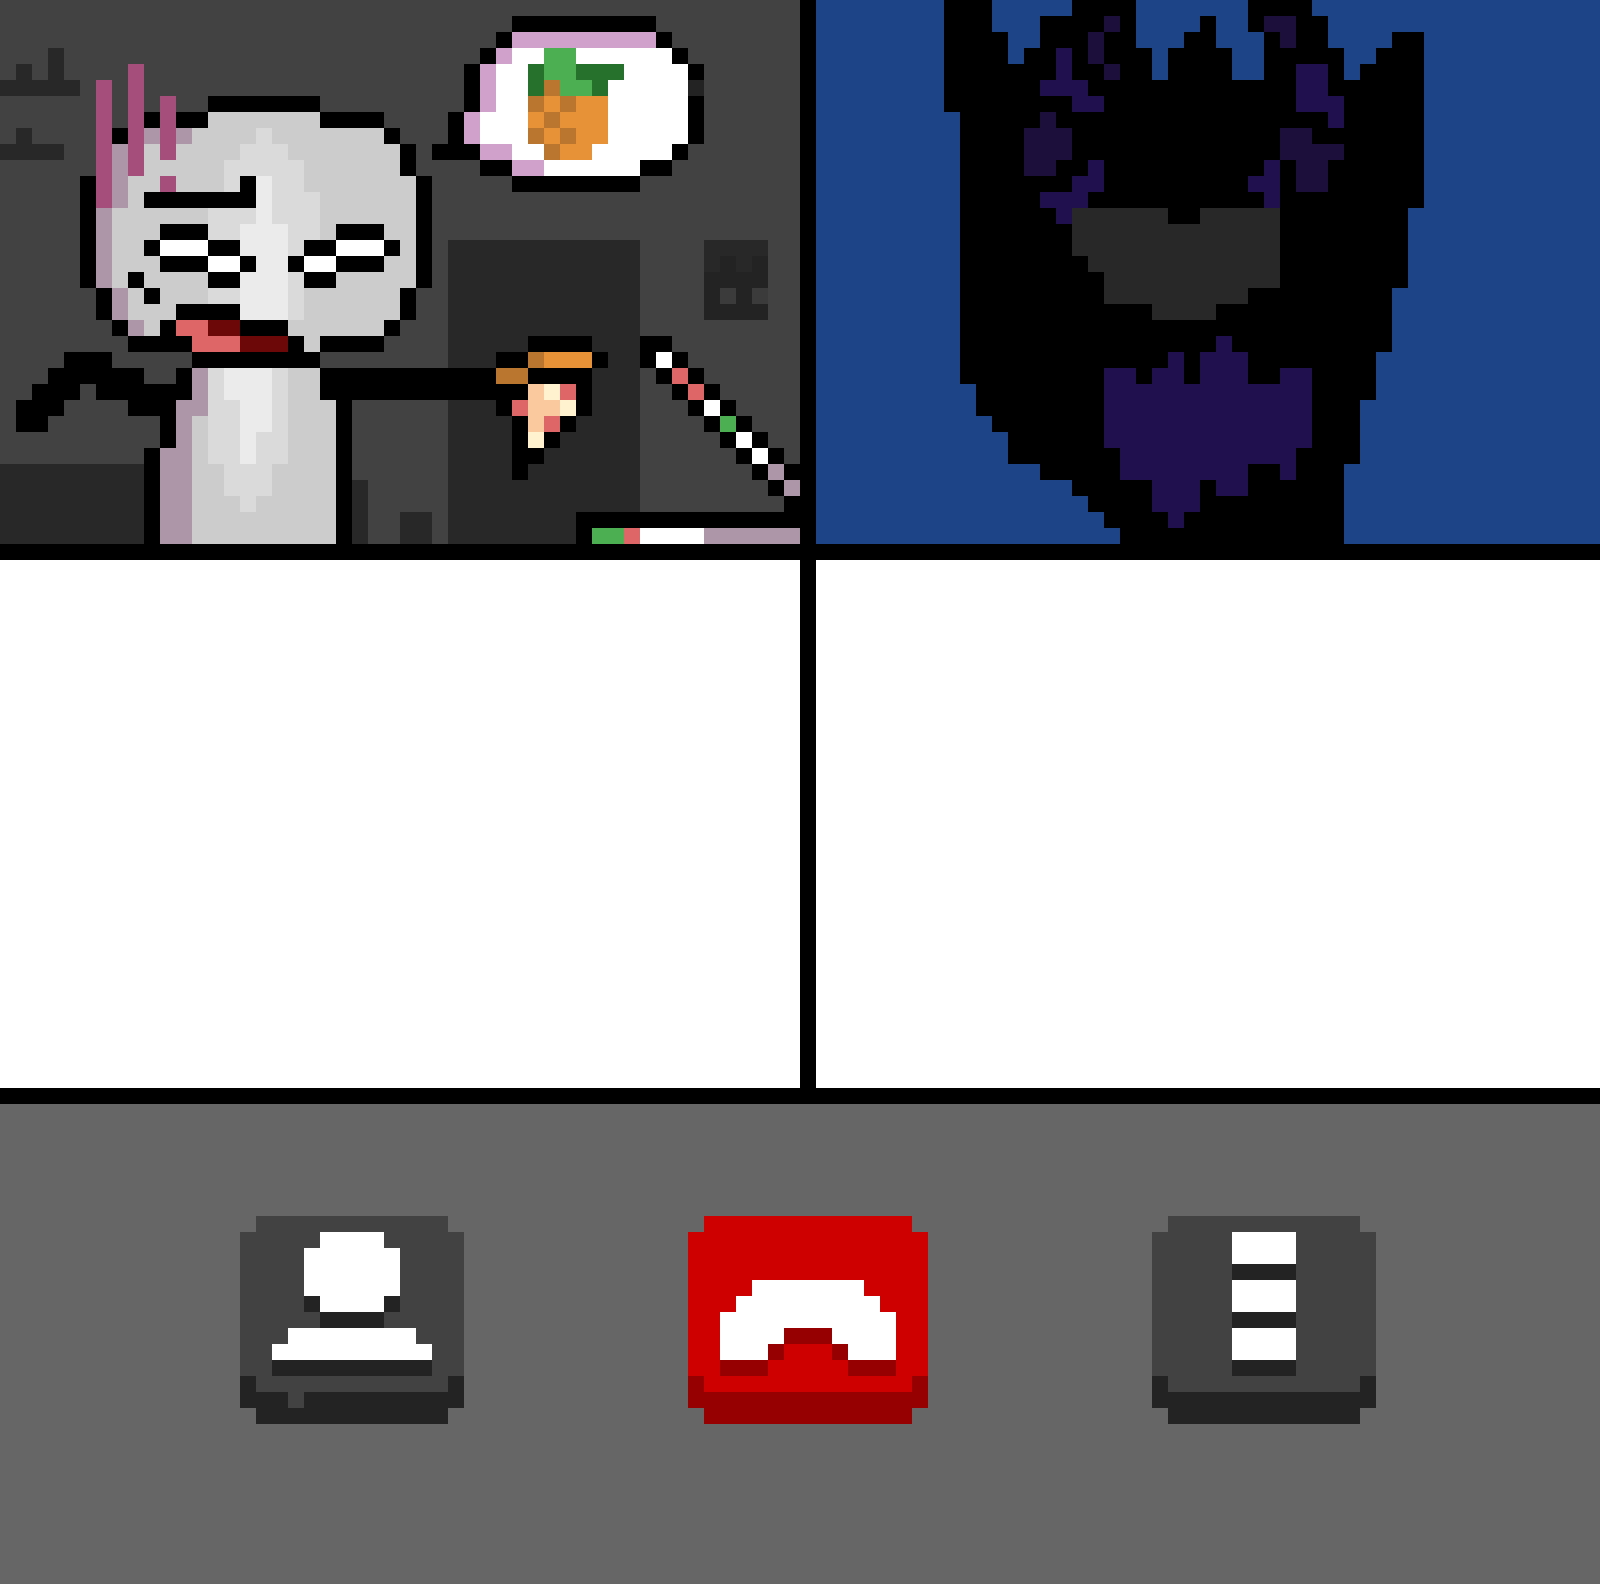 @Manguito767 Video call challenge (Demon Tom (Eddsworld) joined the chat)